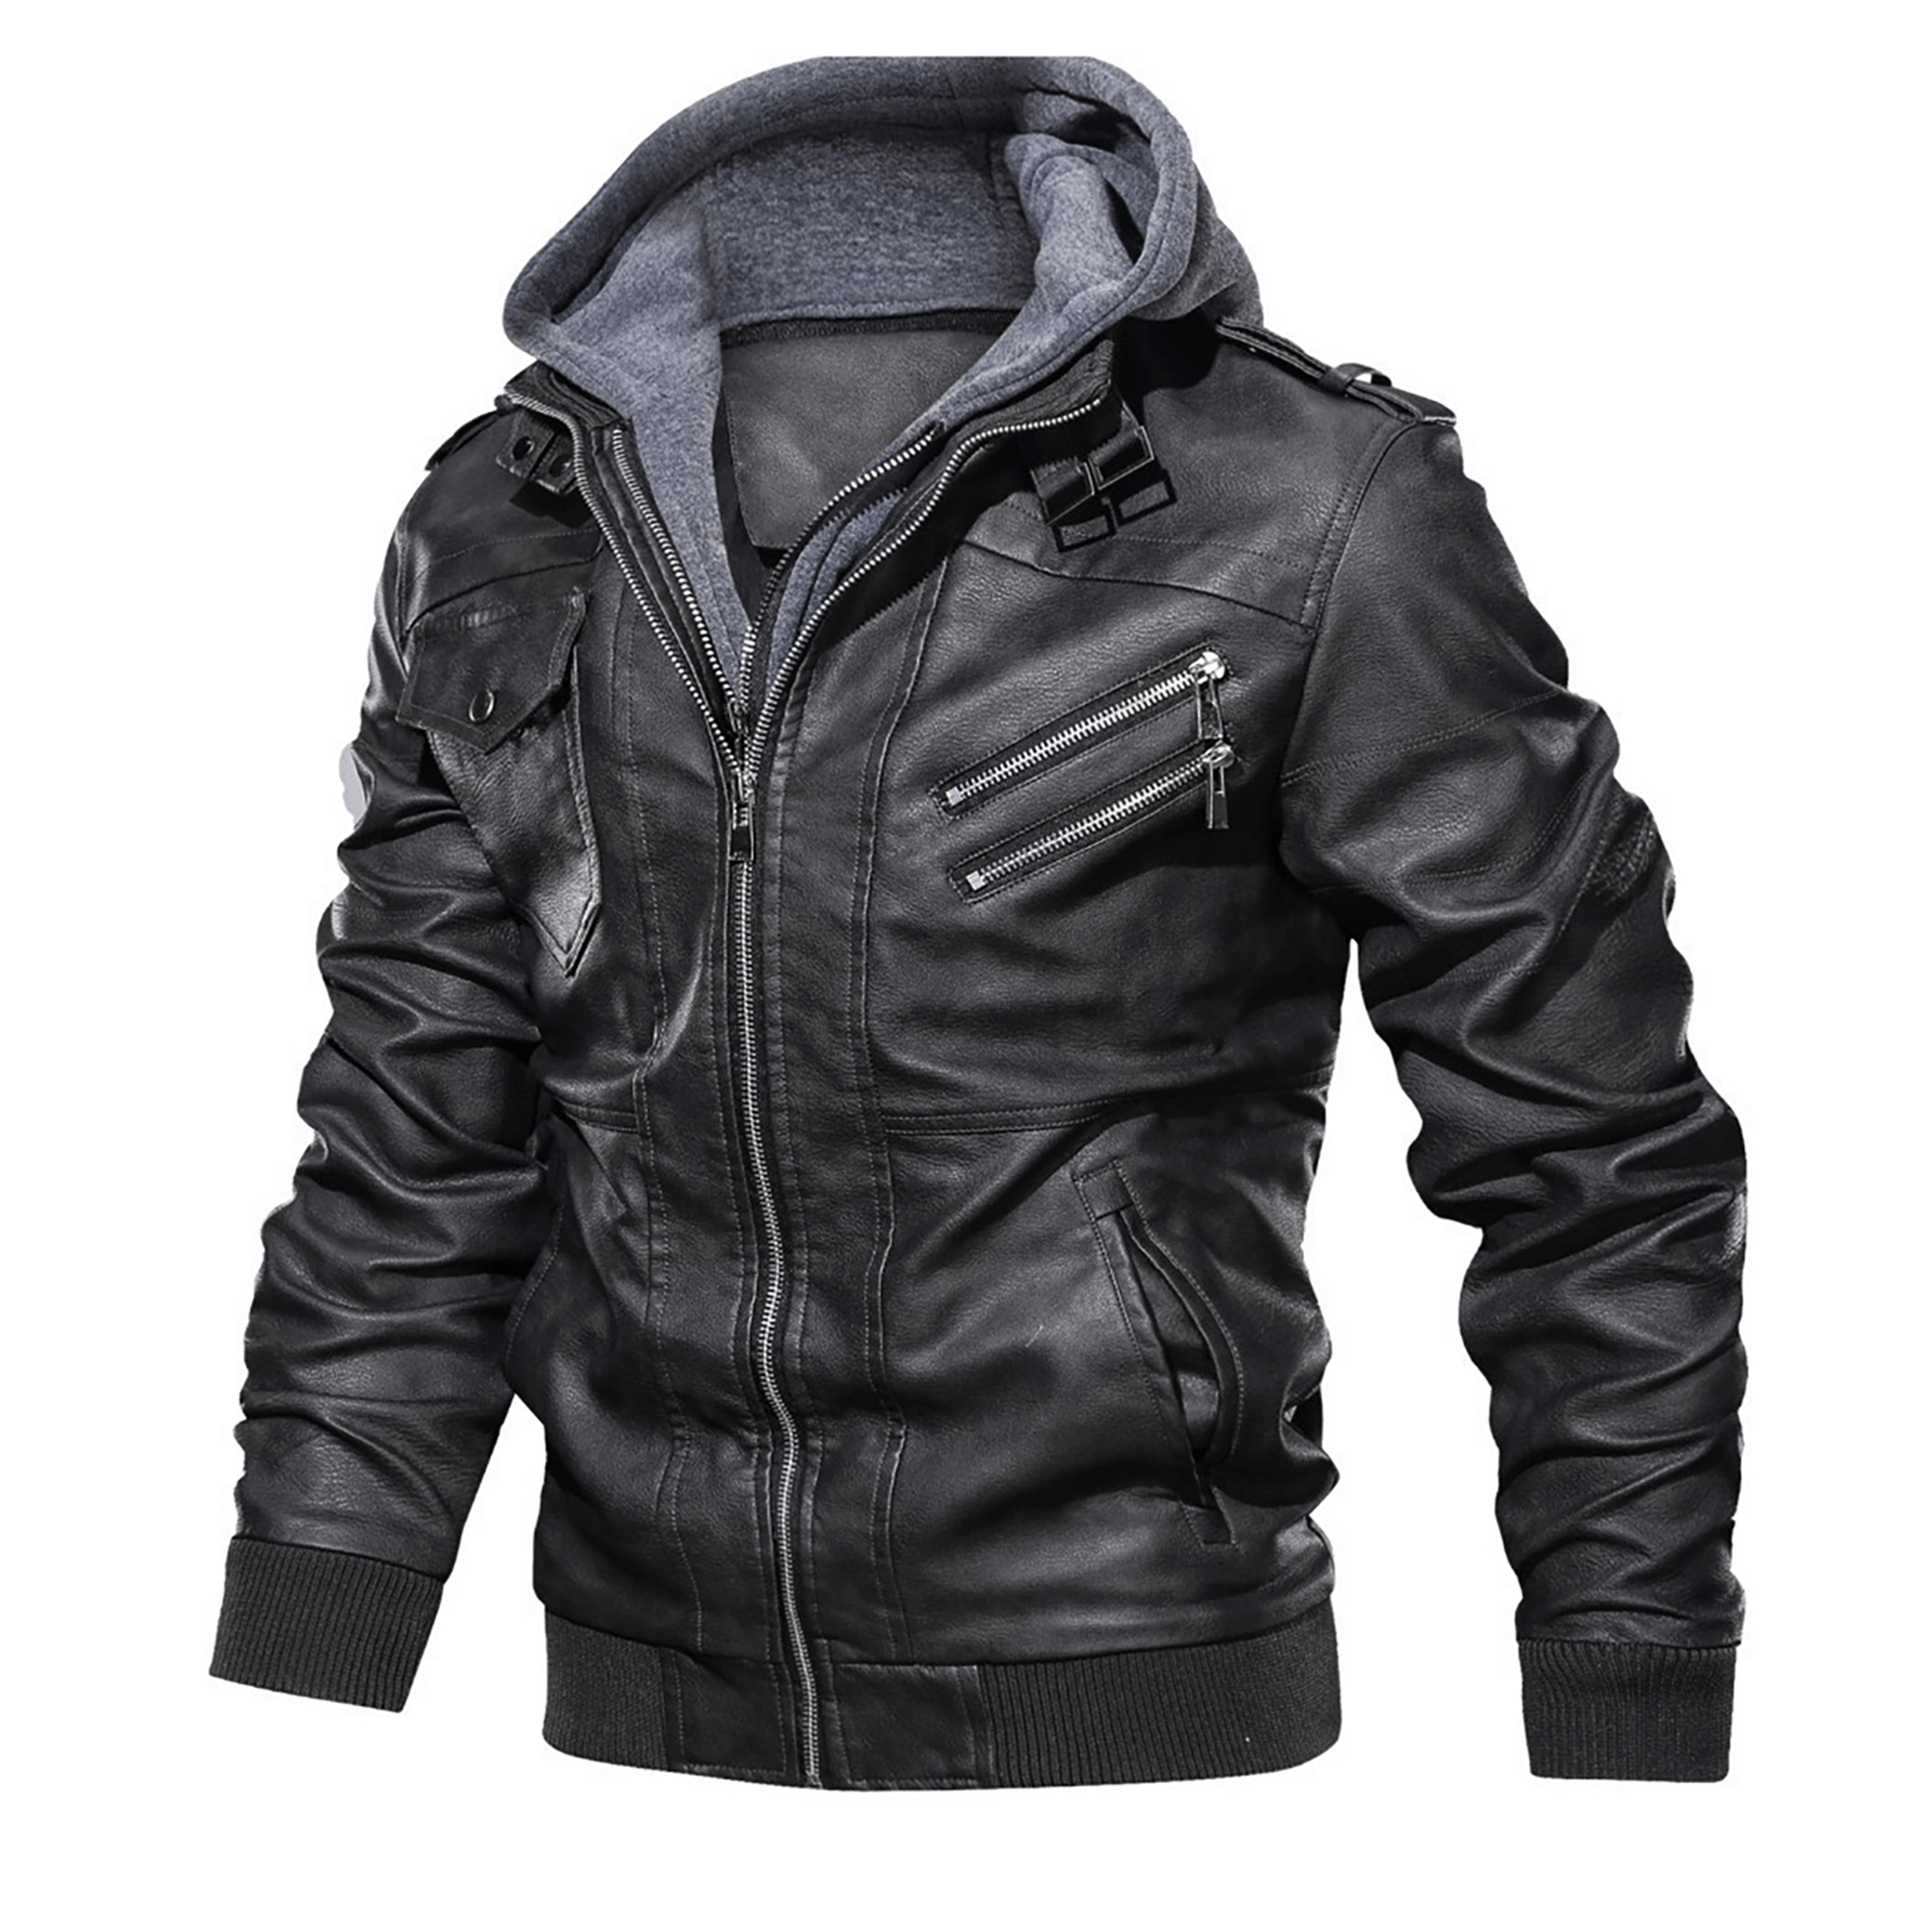 Top leather jackets and latest products 267